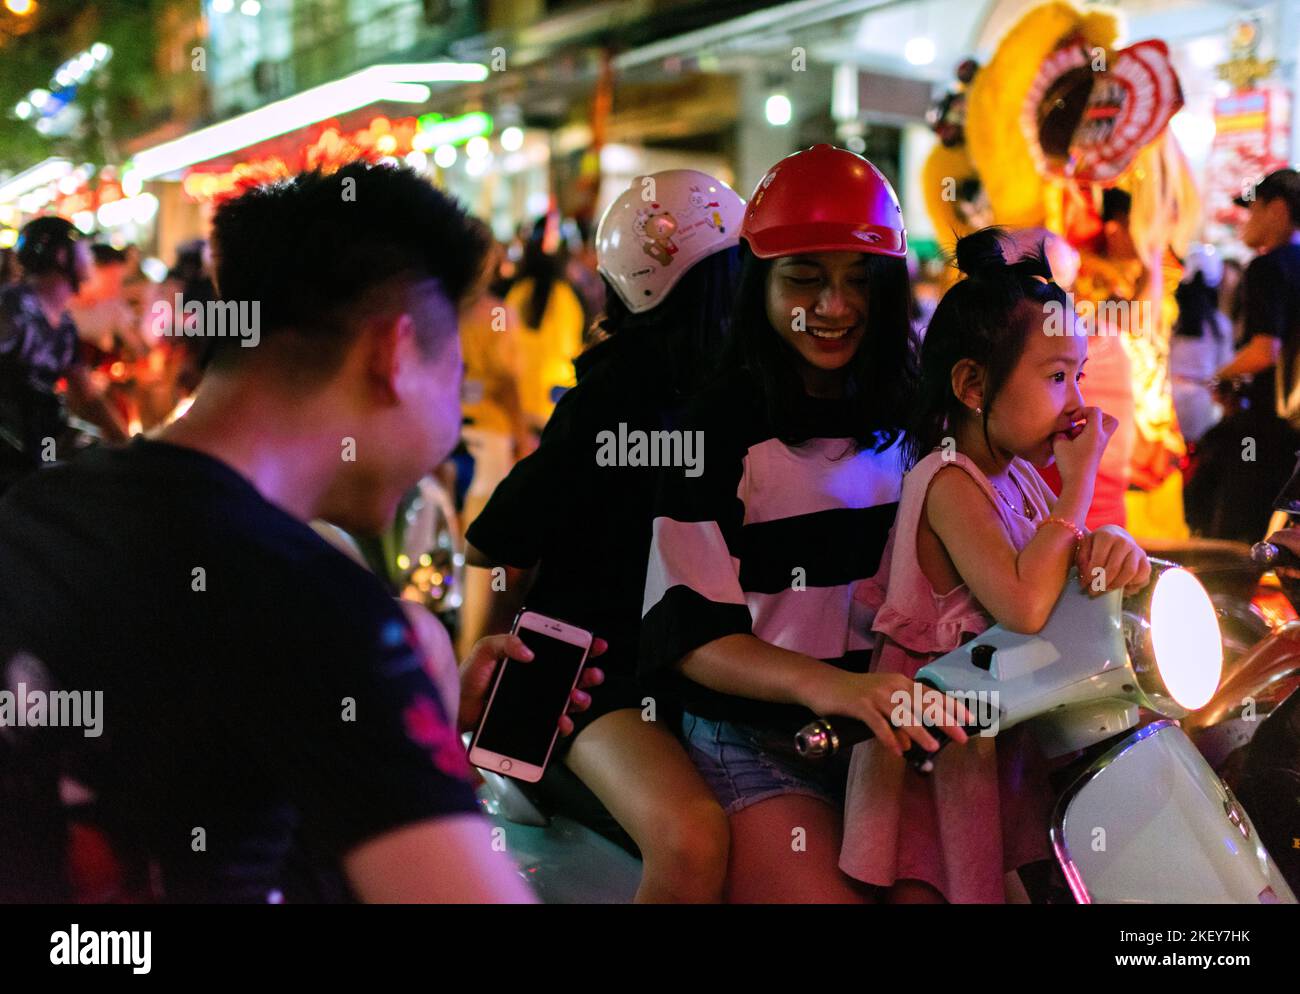 Cat Ba Island, Halong Bay, Vietnam; September 22, 2018: Young girl smiles at young man as she rides a scooter through heavy traffic on a holiday stree Stock Photo